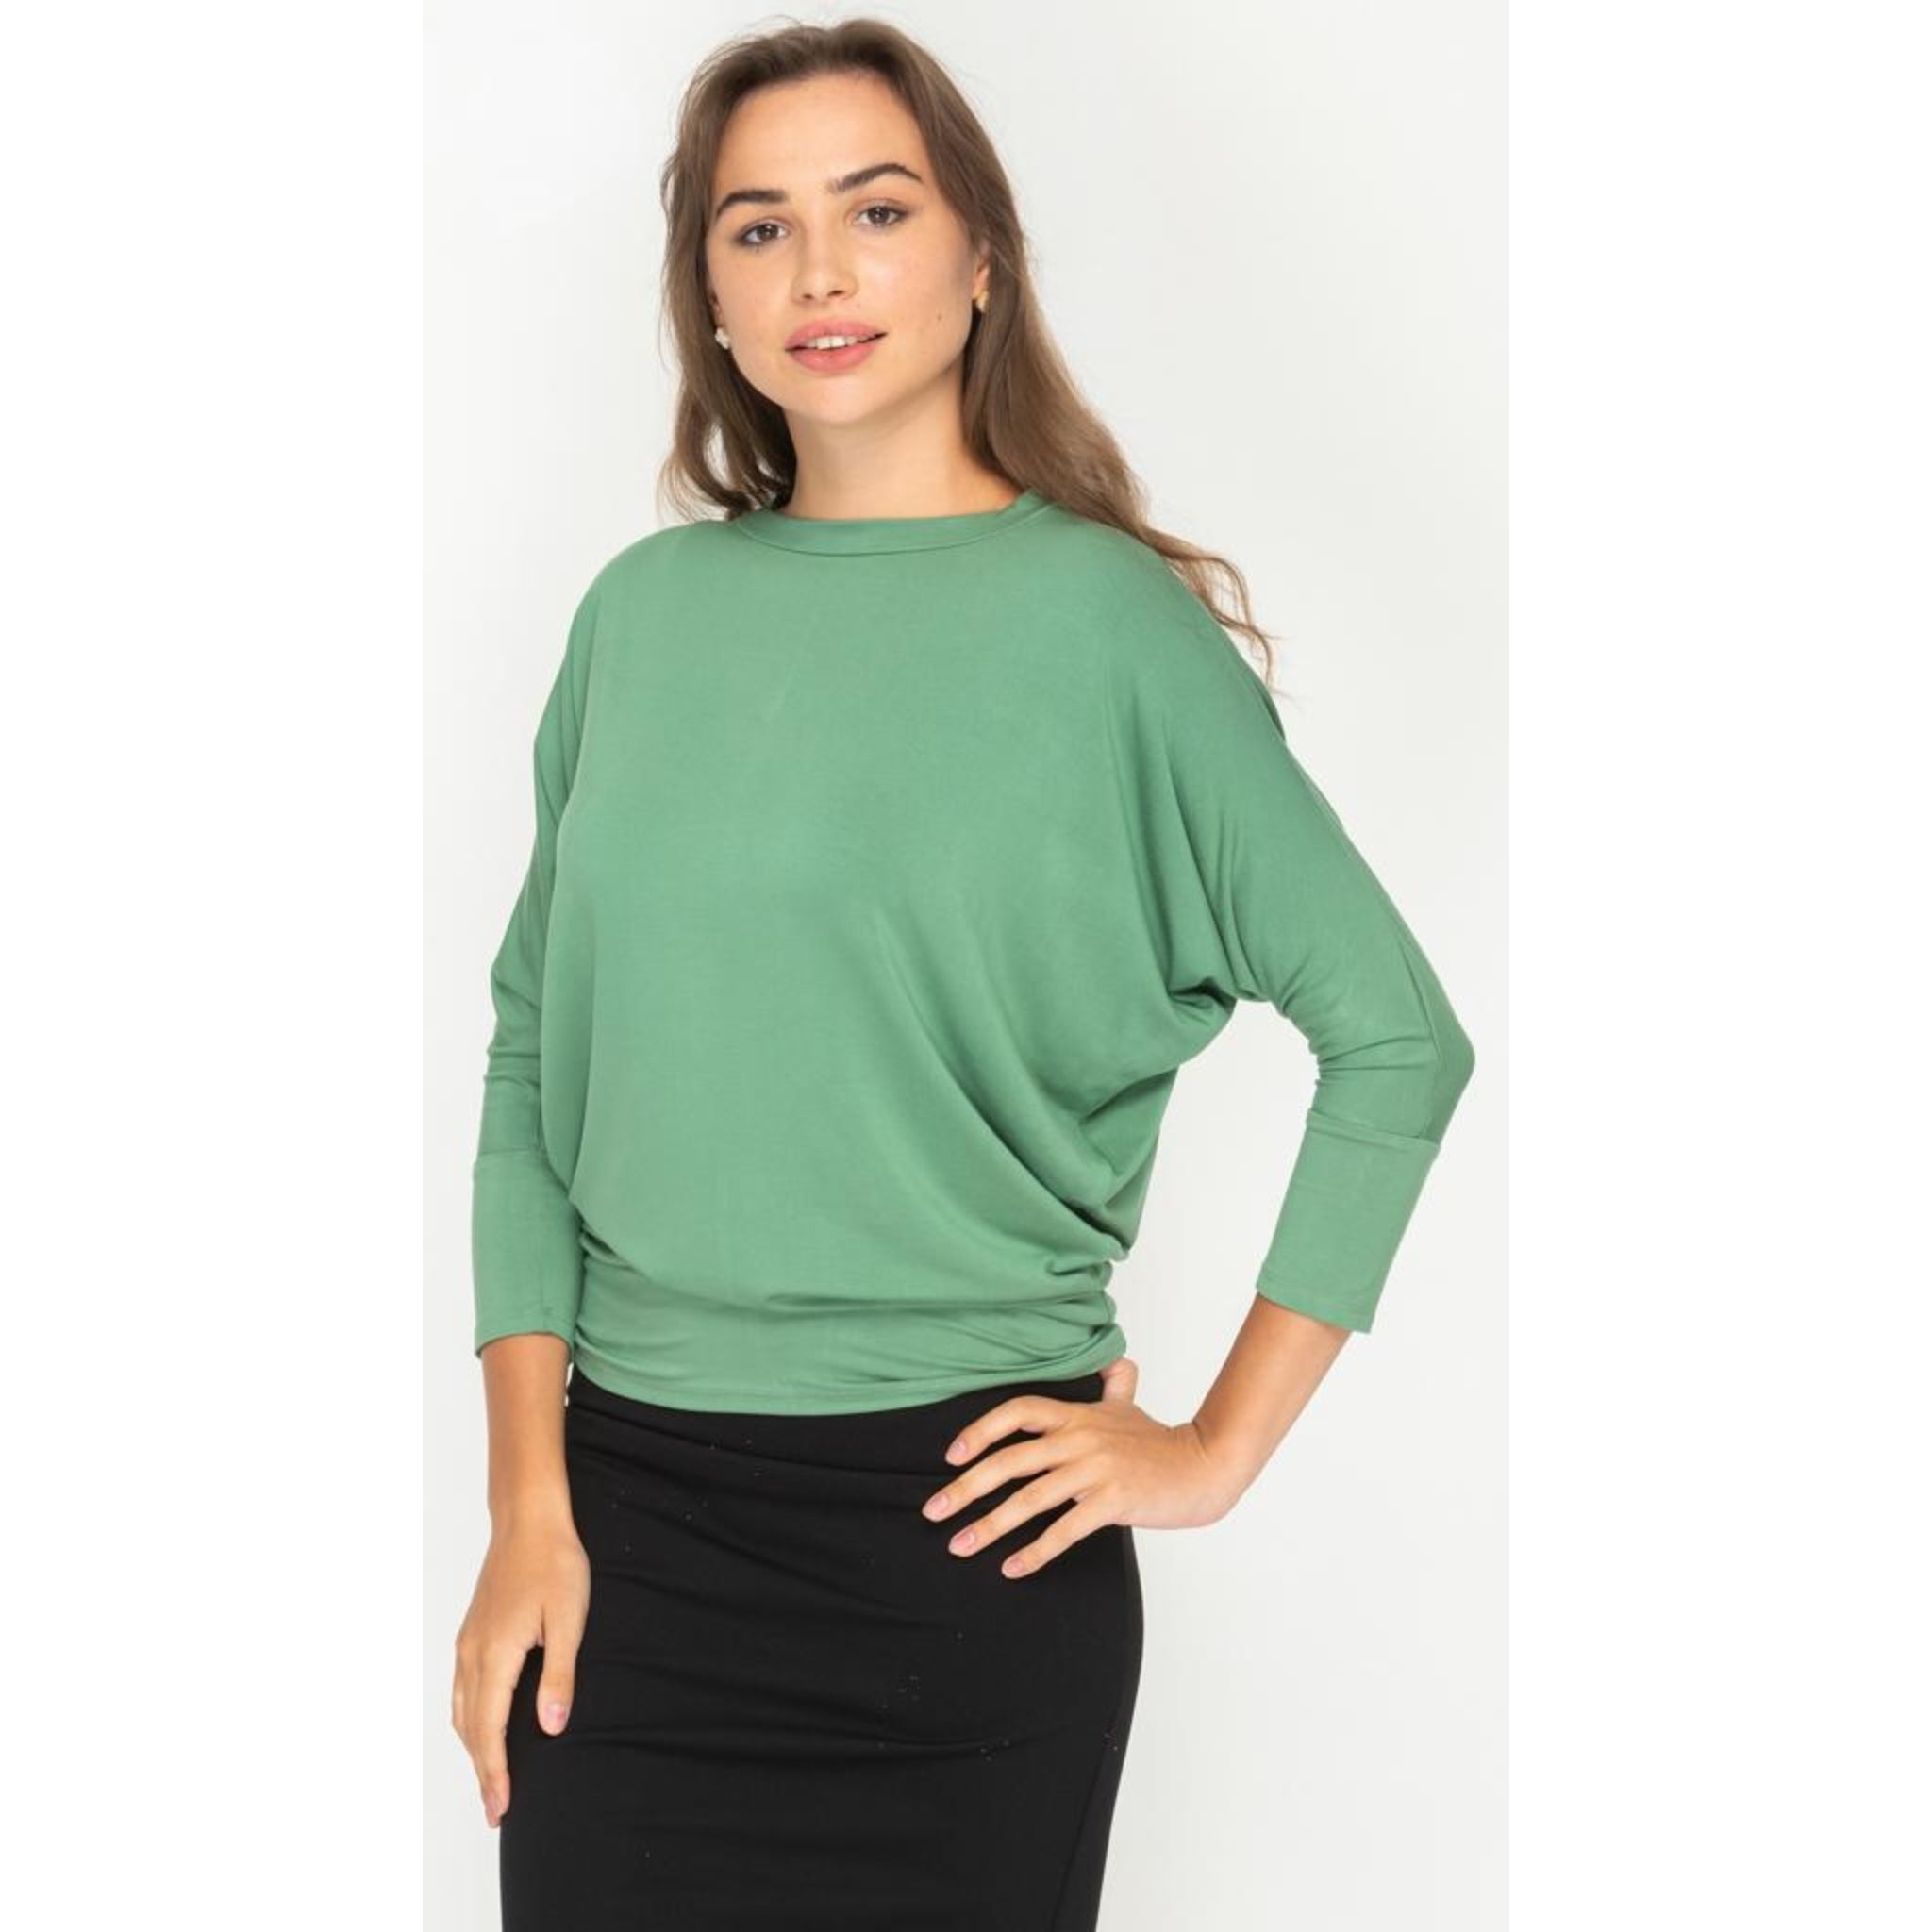 Waisted Dolman Top by KMW Green